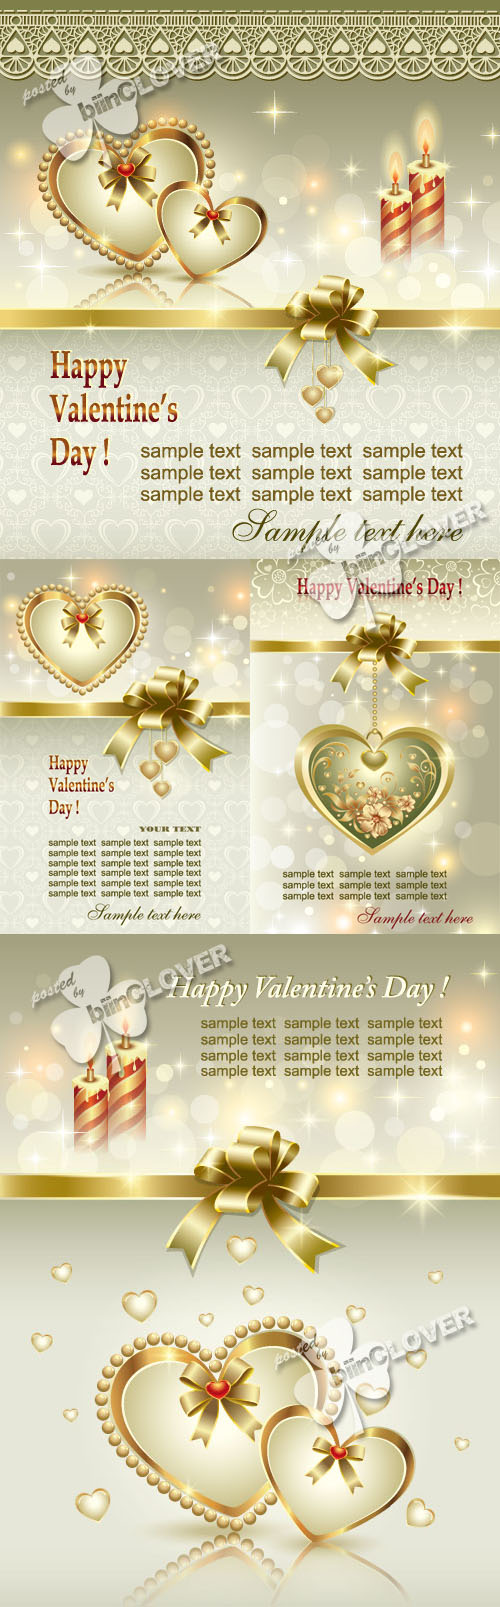 Beautiful Valentines day cards 0268